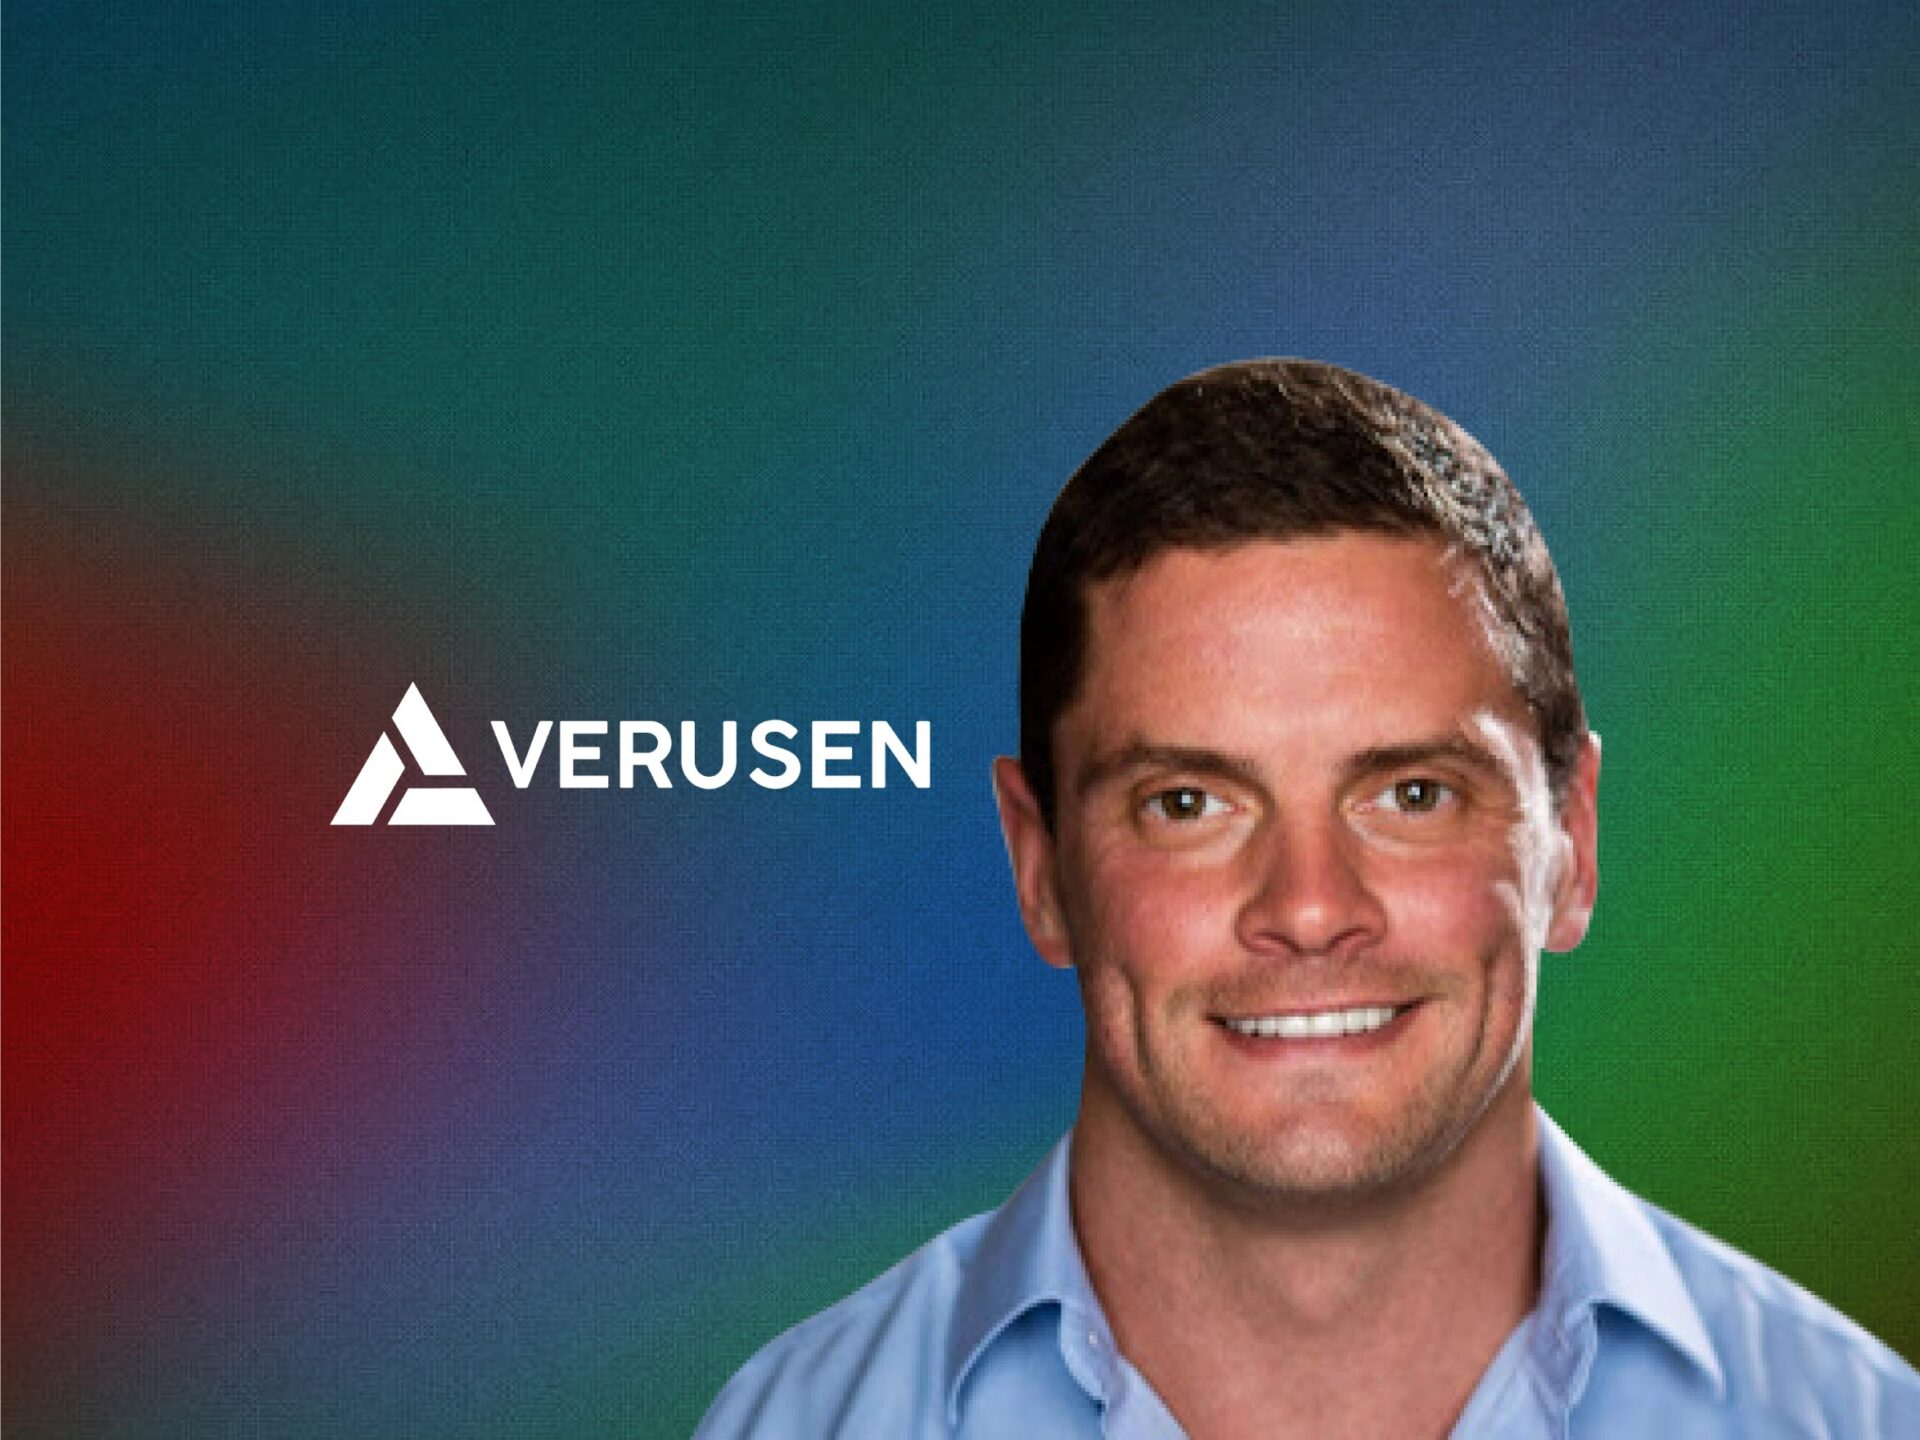 Global Fintech Interview with Brent Stringer, Chief Financial Officer at Verusen